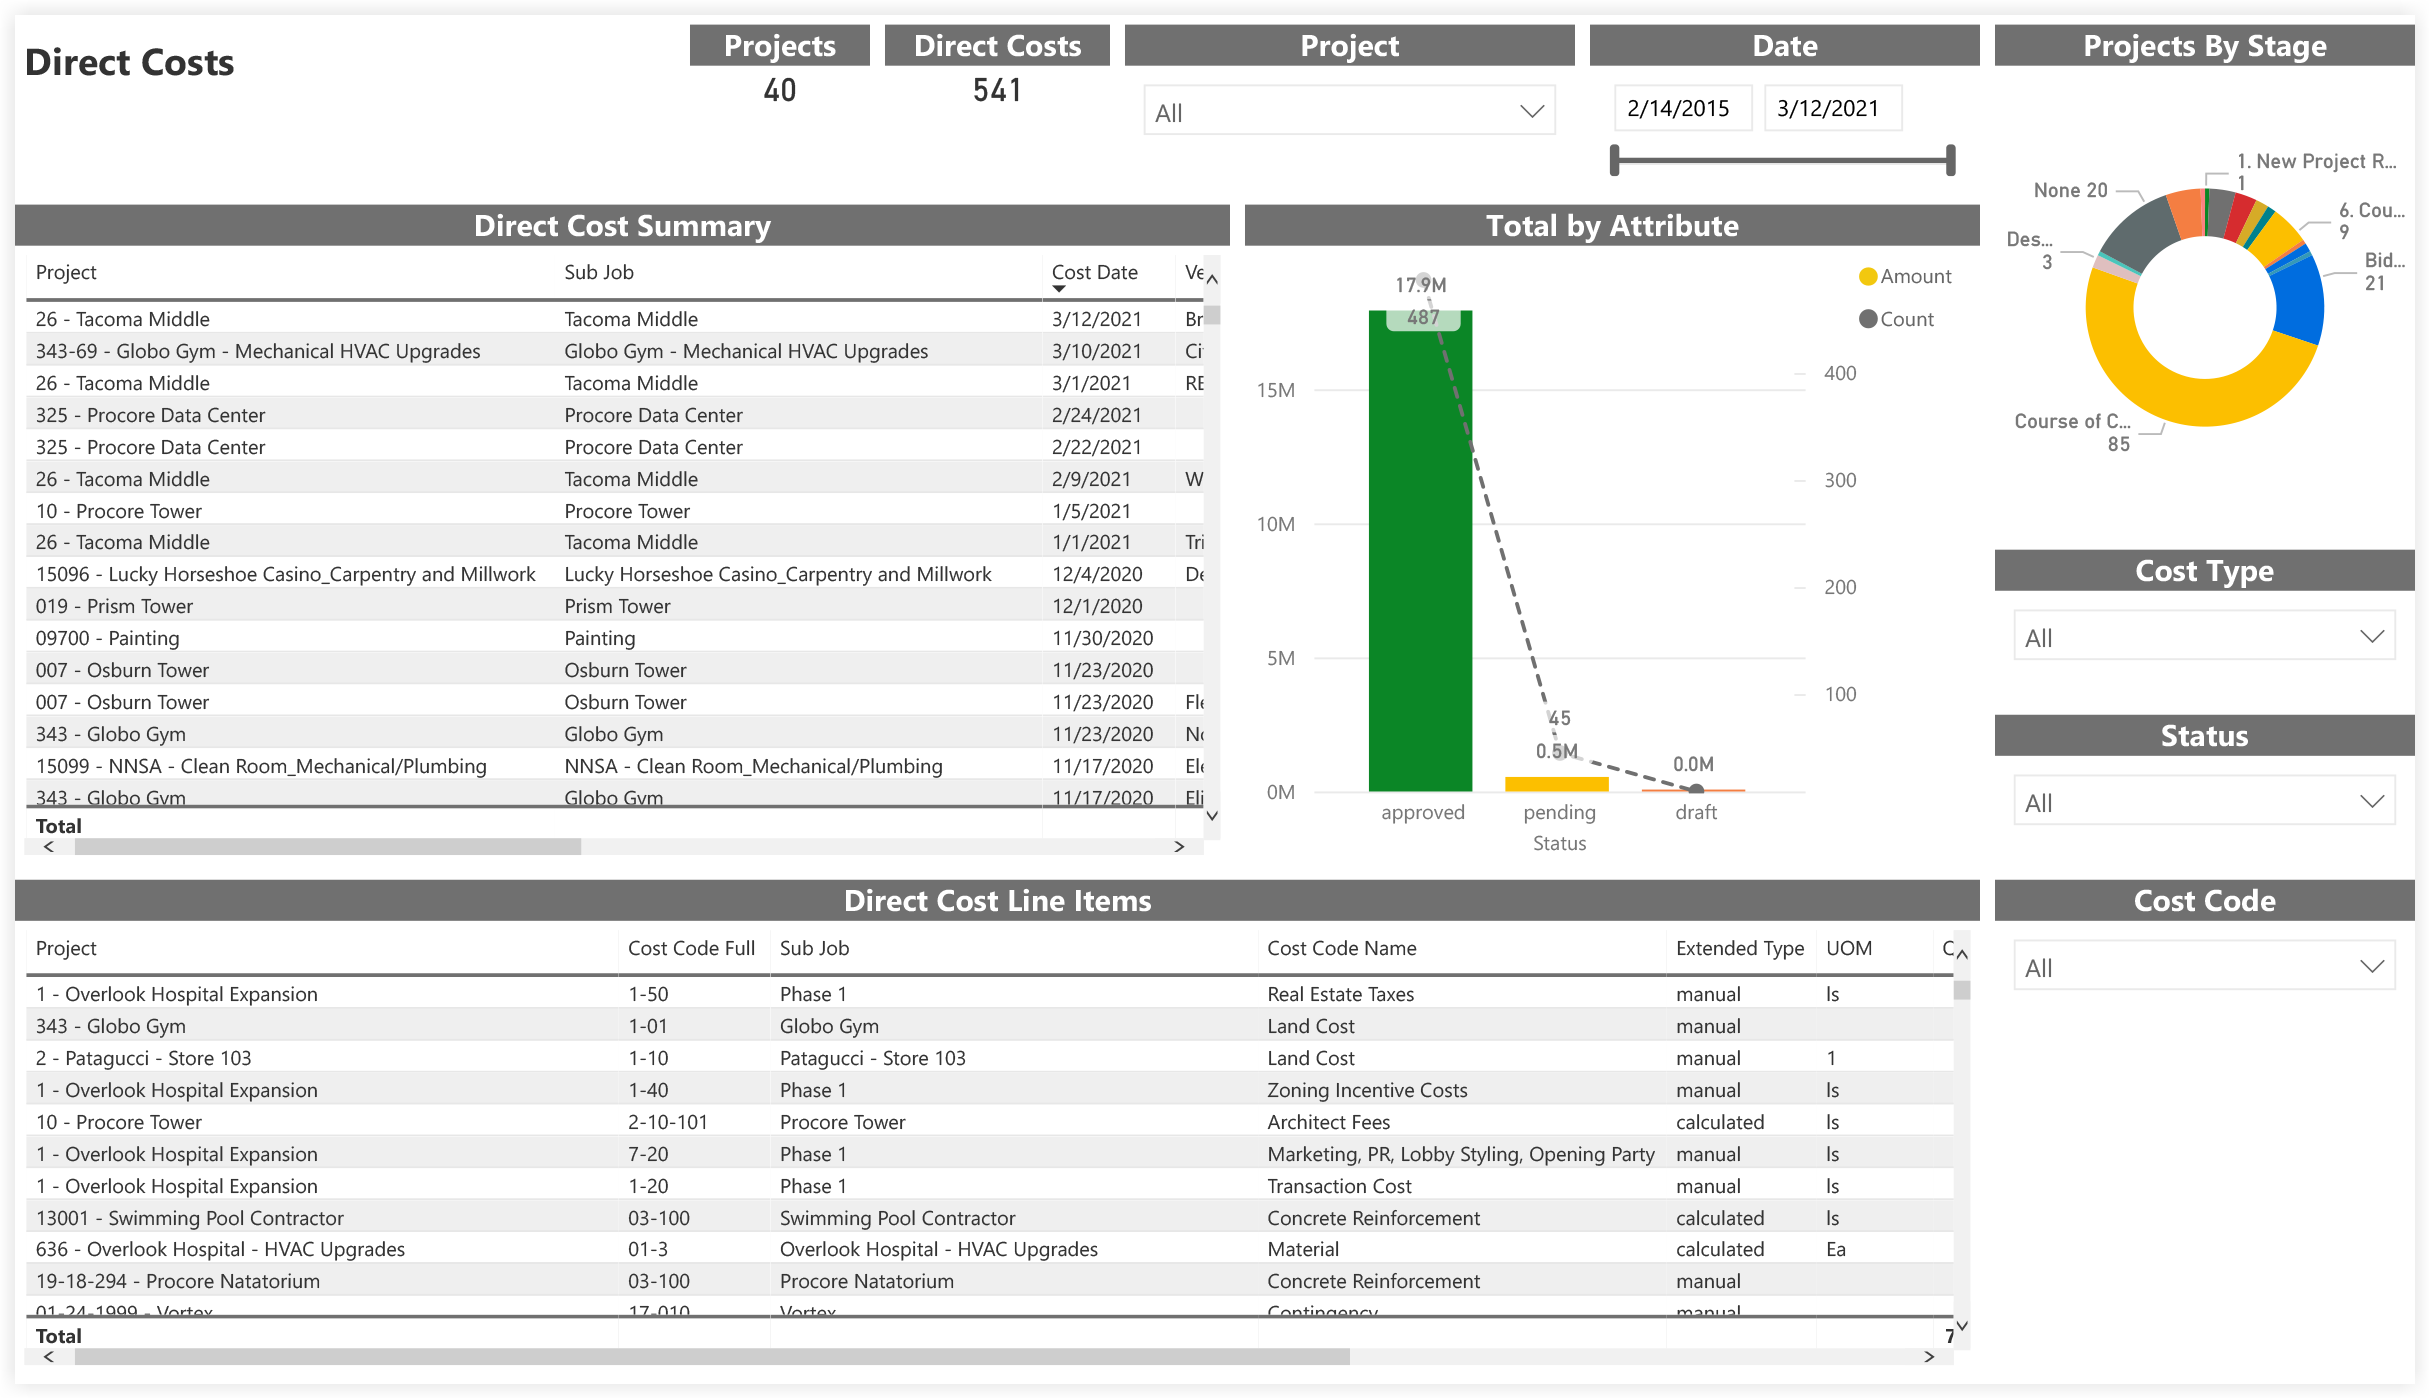 procore-analytics-financials-direct-costs.png